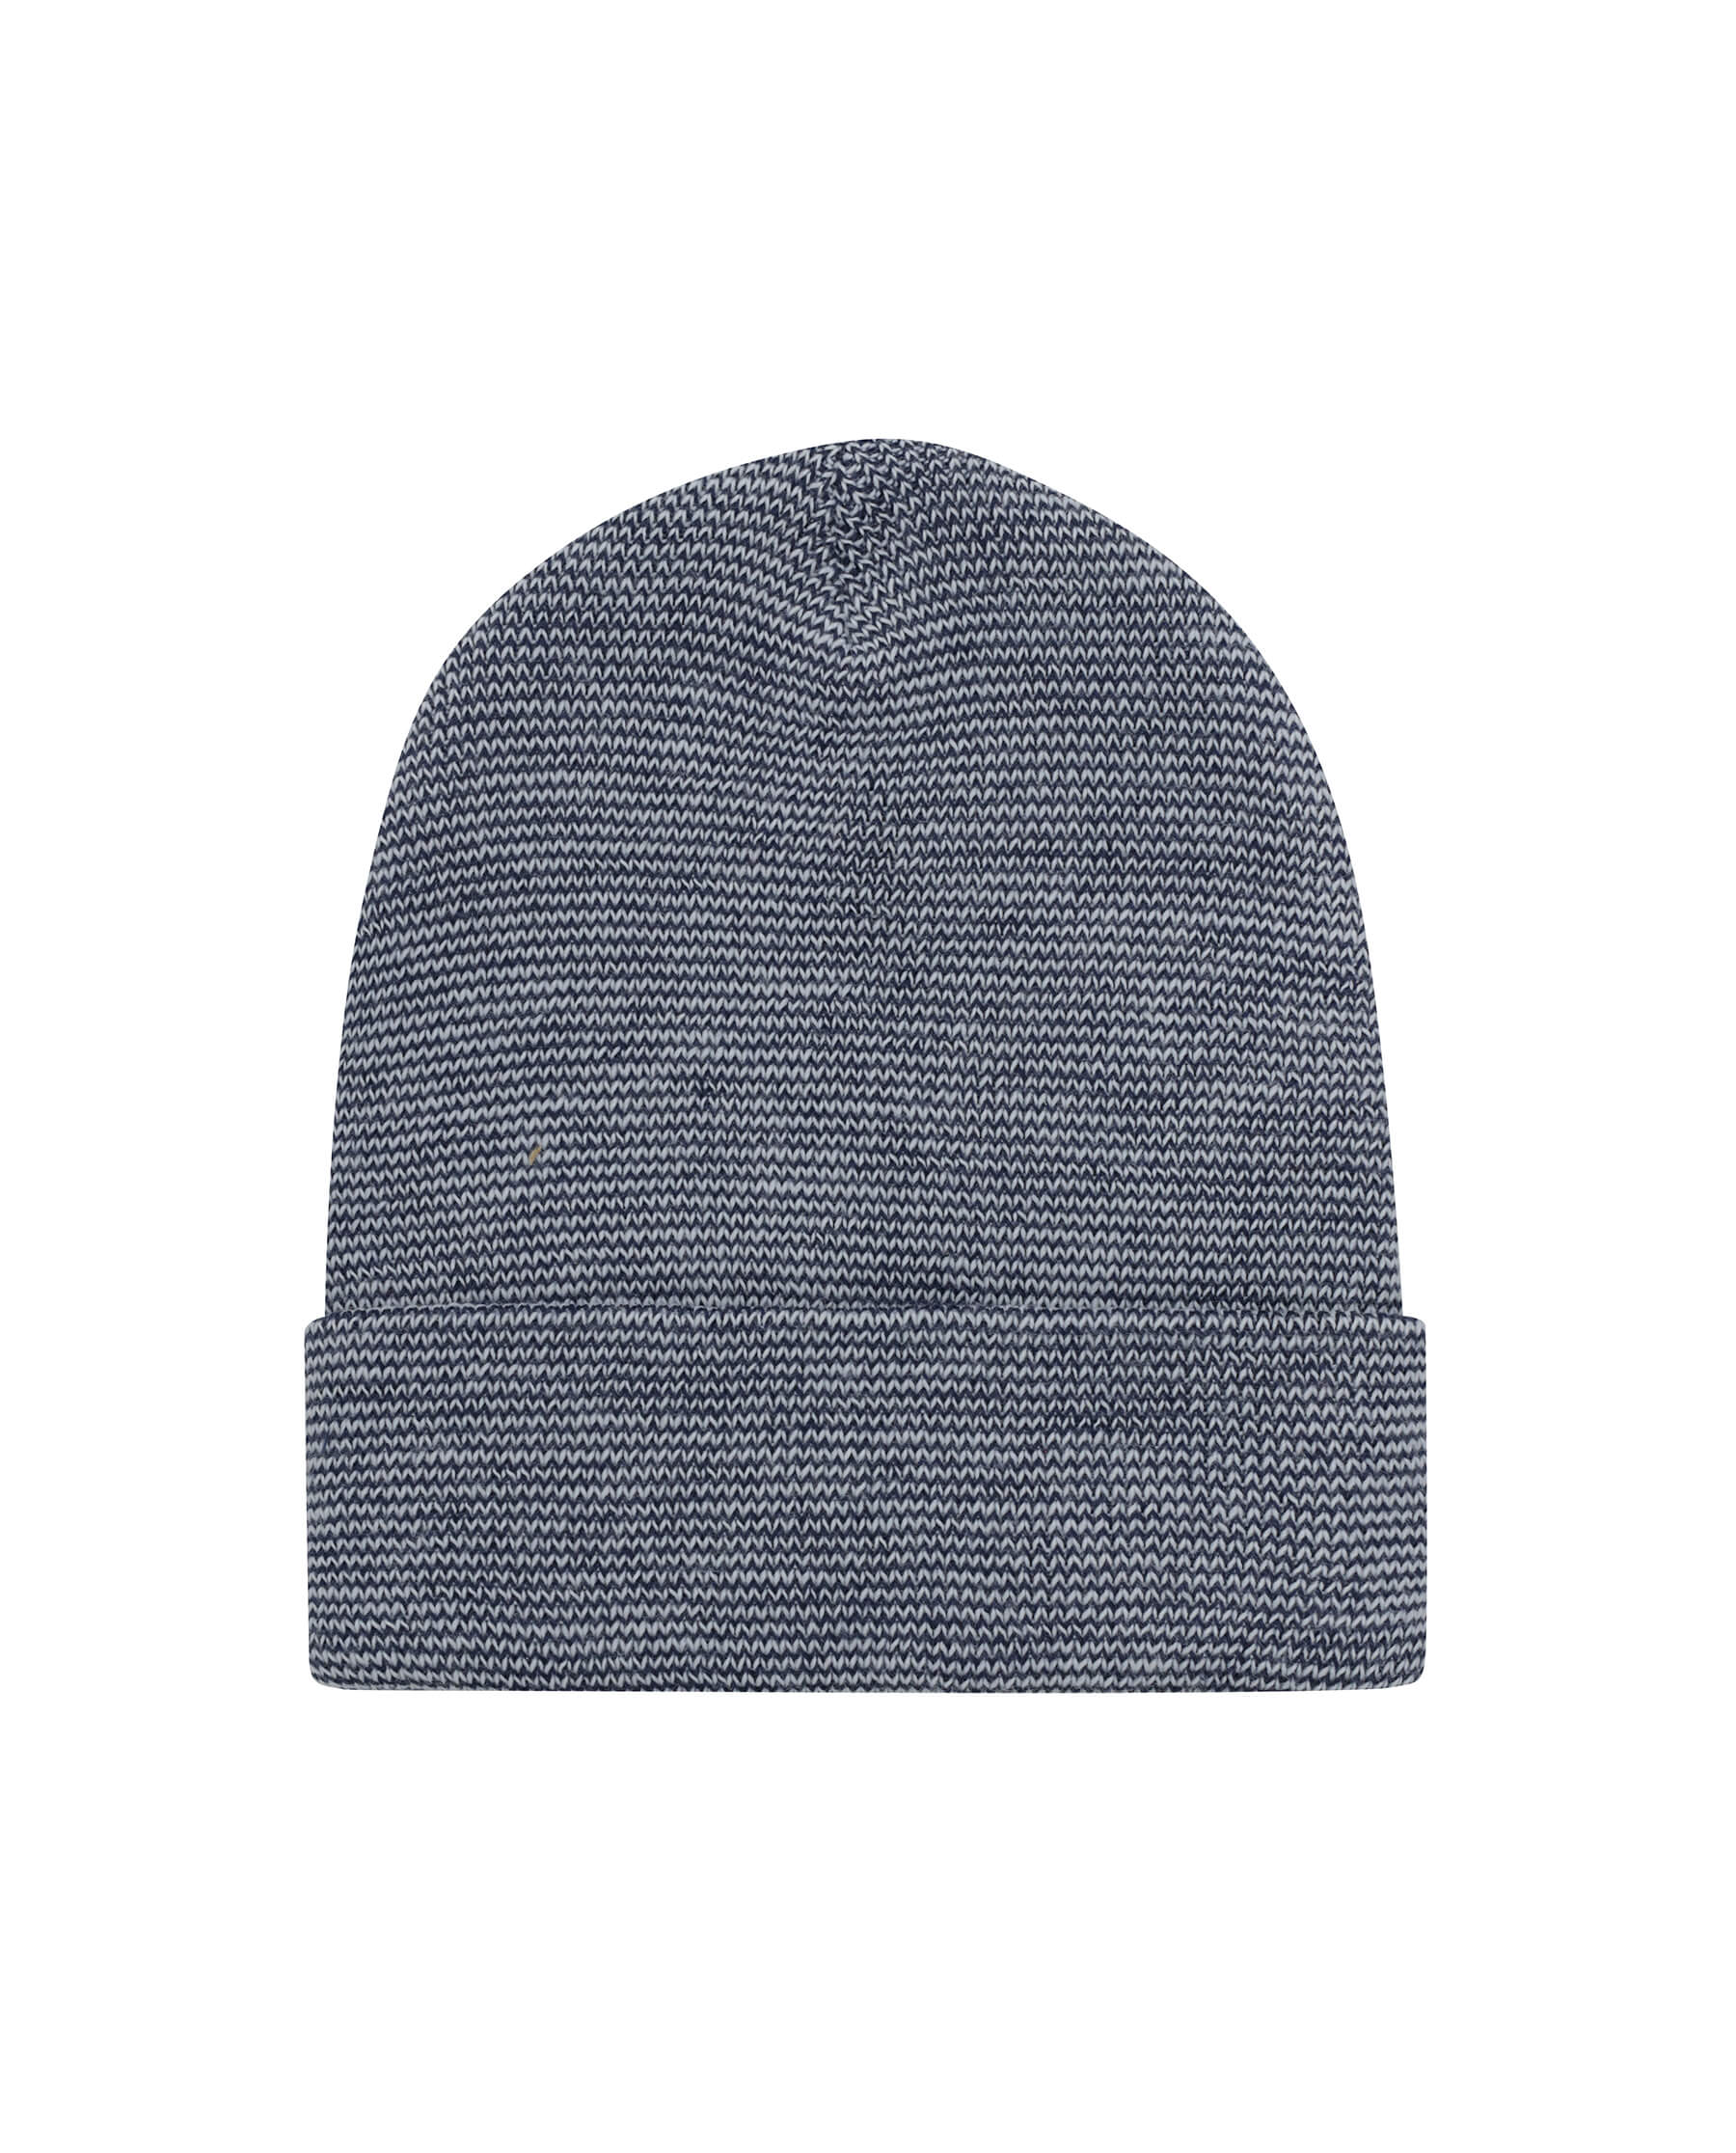 The Beanie. -- Navy Stripe HATS THE GREAT. PS24 SHRUNKEN AND BEANIES